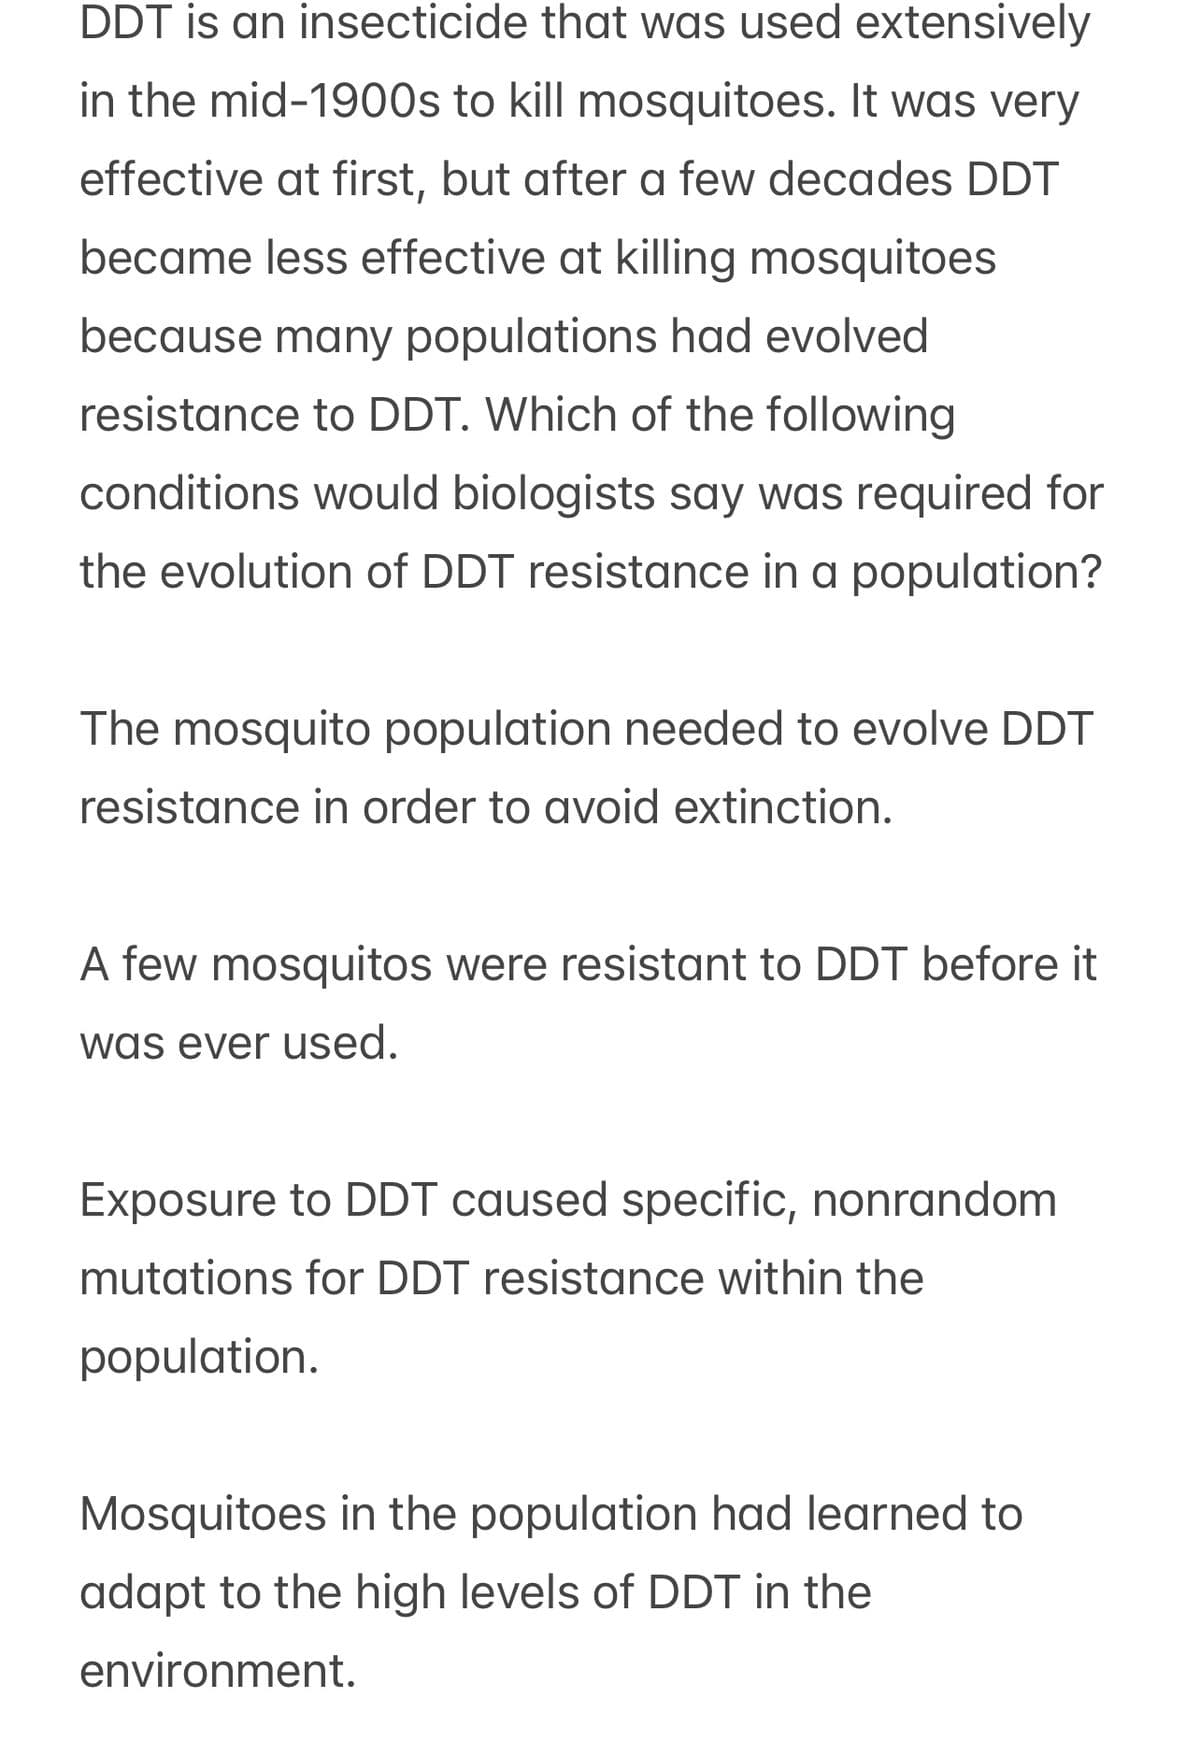 DDT is an insecticide that was used extensively
in the mid-1900s to kill mosquitoes. It was very
effective at first, but after a few decades DDT
became less effective at killing mosquitoes
because many populations had evolved
resistance to DDT. Which of the following
conditions would biologists say was required for
the evolution of DDT resistance in a population?
The mosquito population needed to evolve DDT
resistance in order to avoid extinction.
A few mosquitos were resistant to DDT before it
was ever used.
Exposure to DDT caused specific, nonrandom
mutations for DDT resistance within the
population.
Mosquitoes in the population had learned to
adapt to the high levels of DDT in the
environment.